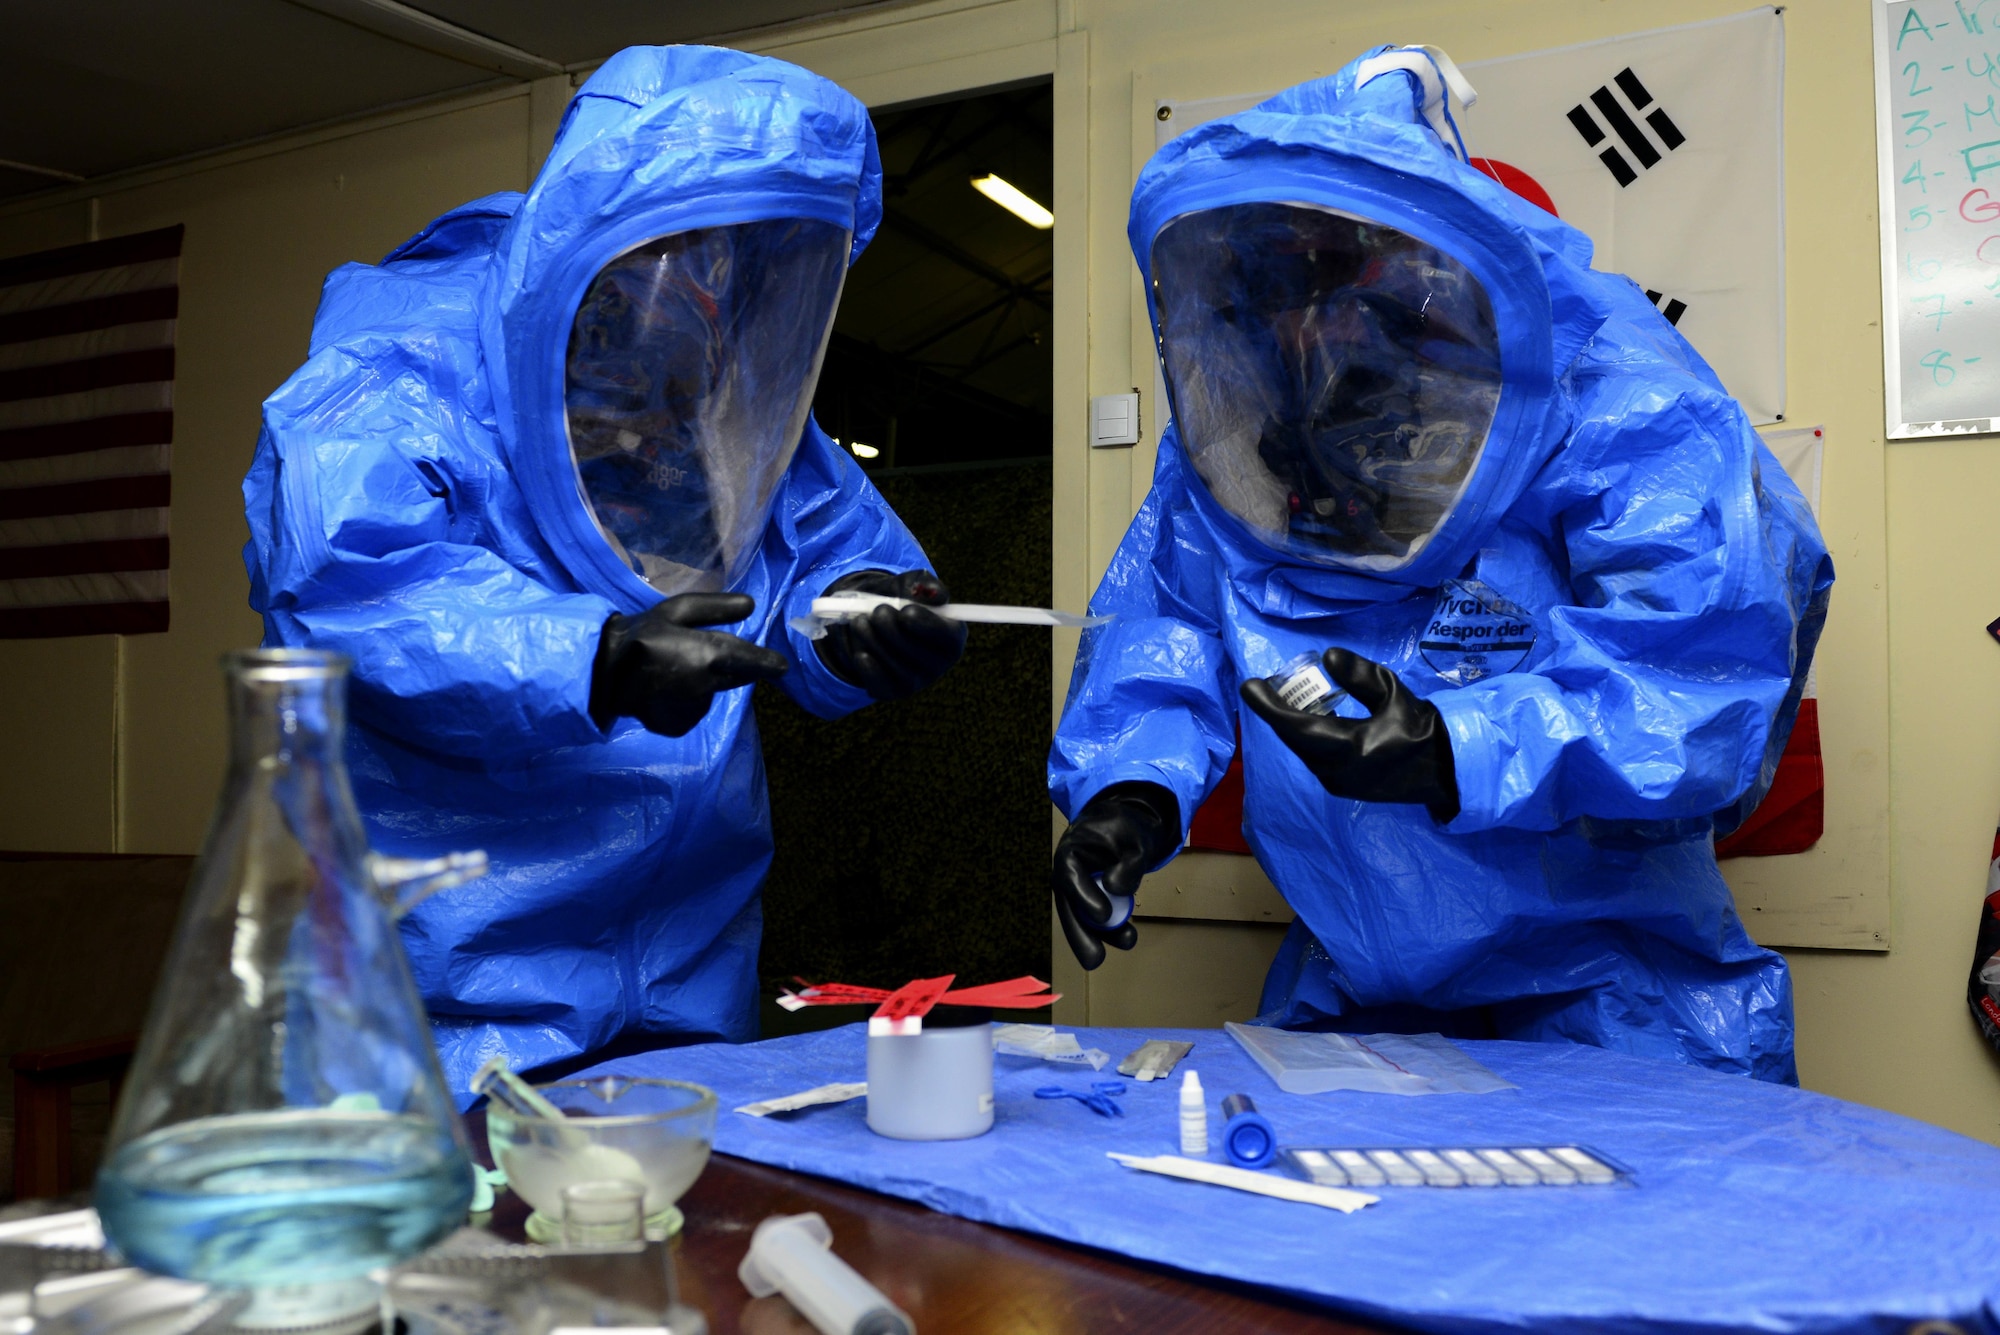 U.S. Air Force Chief Master Sgt. Vegas Clark, 39th Air Base Wing command chief, (left) and Staff Sgt. Joshua Bartley, 39th Civil Engineer Squadron (CES) emergency management journeyman, perform sampling and evidence collection procedures July 13, 2016, at Incirlik Air Base, Turkey. Clark responded to a simulated crime scene during his visit with the 39th CES readiness and emergency management flight. (U.S. Air Force photo by Tech. Sgt. Caleb Pierce)